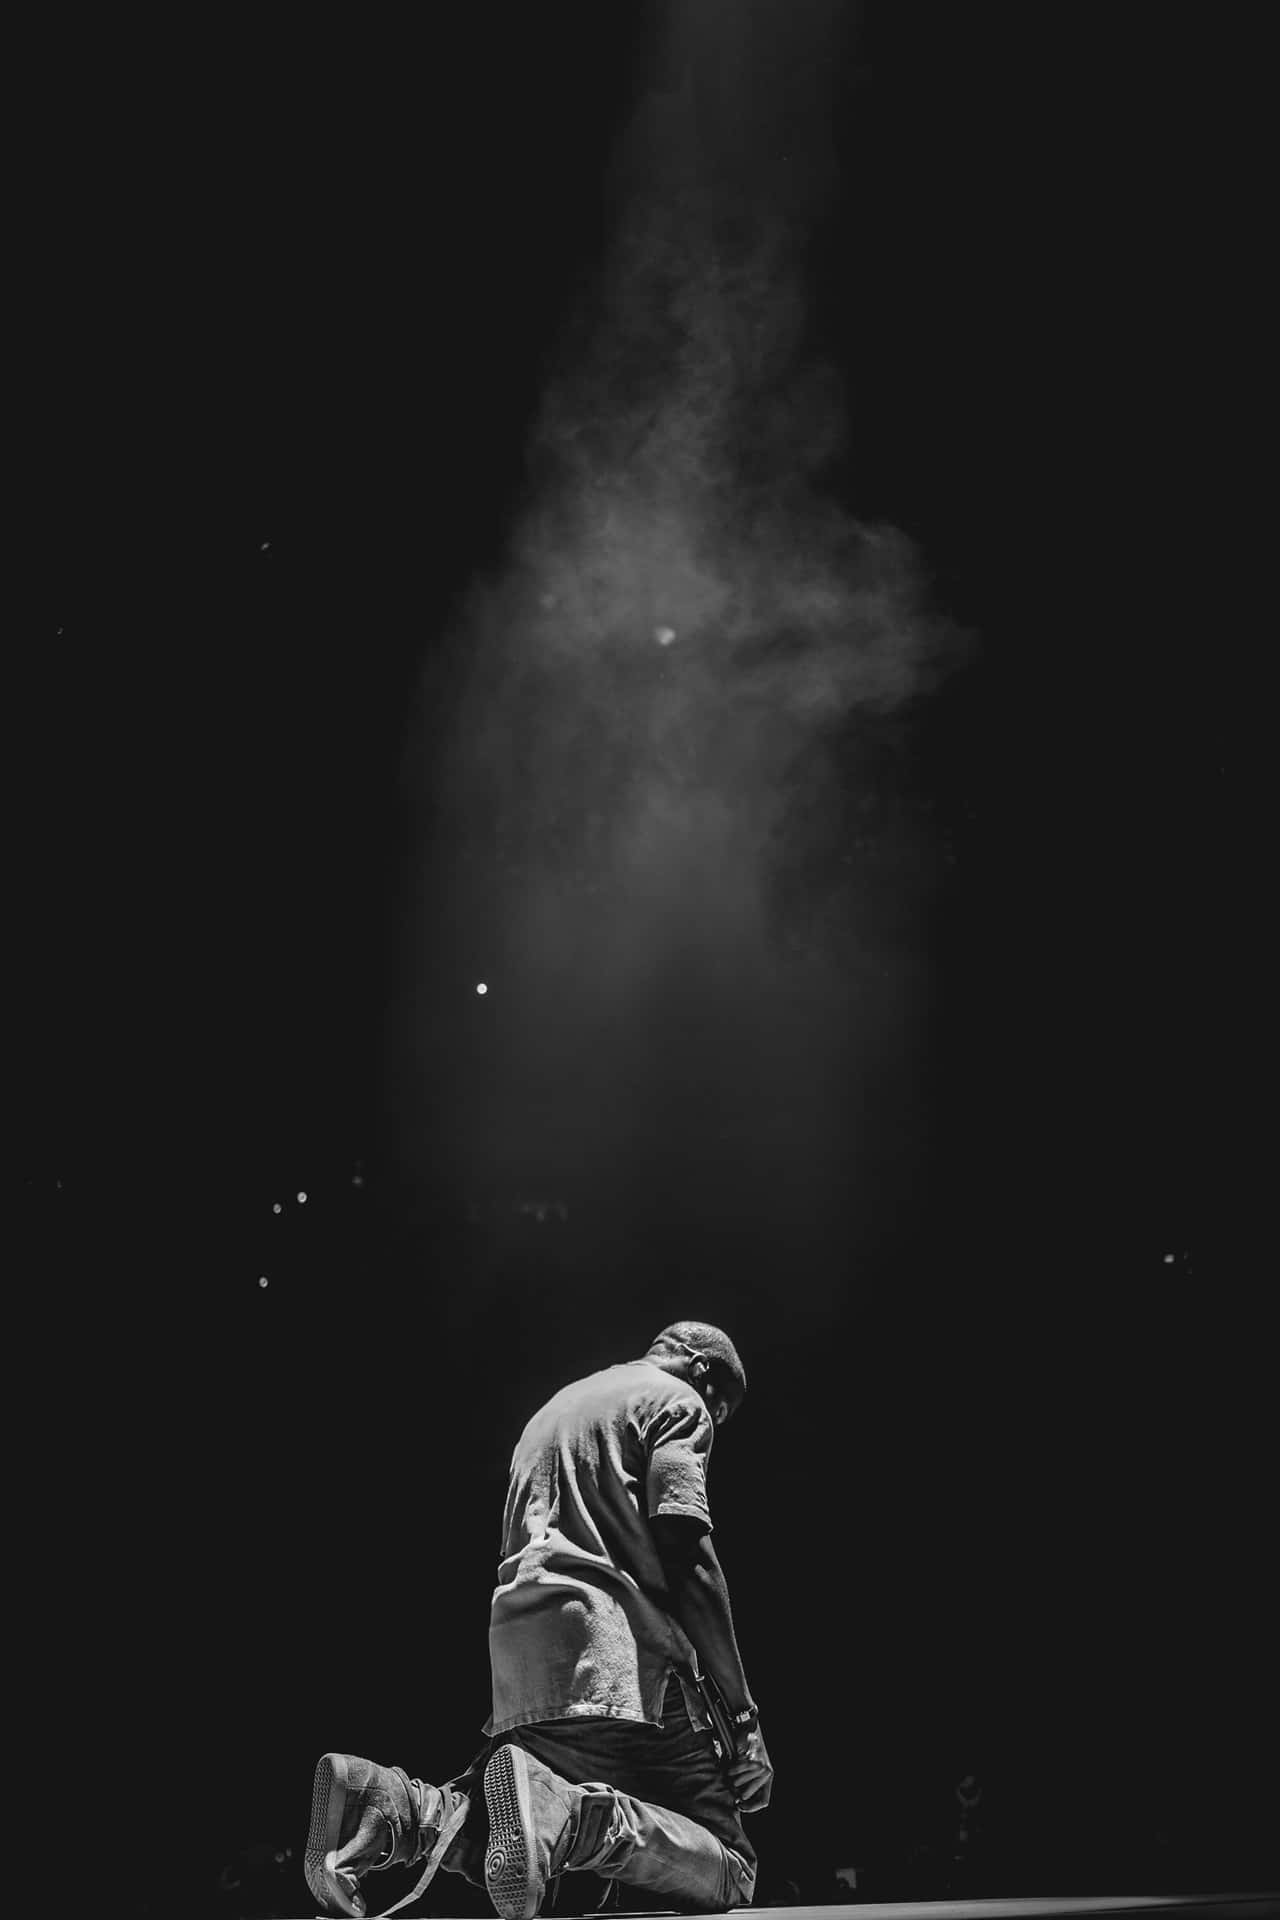 "Kanye West in Yeezus Tour capturing the hearts worldwide" Wallpaper